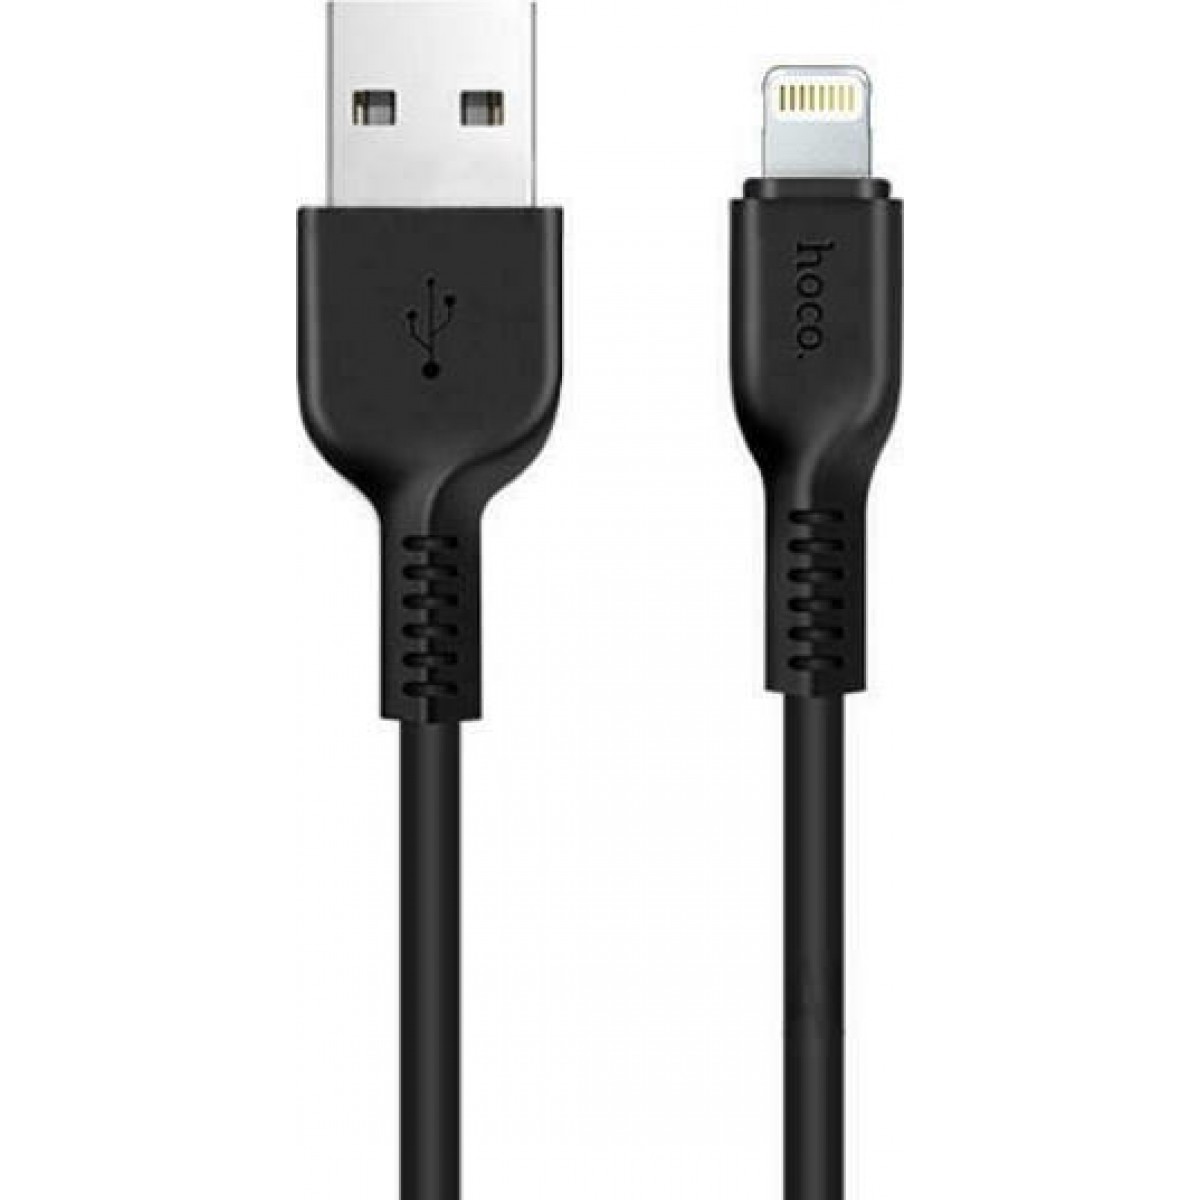 CABLE HOCO FLASH CHARGING DATA CABLE IPHONE LIGHTNING 8-PIN X20 1m BLACK